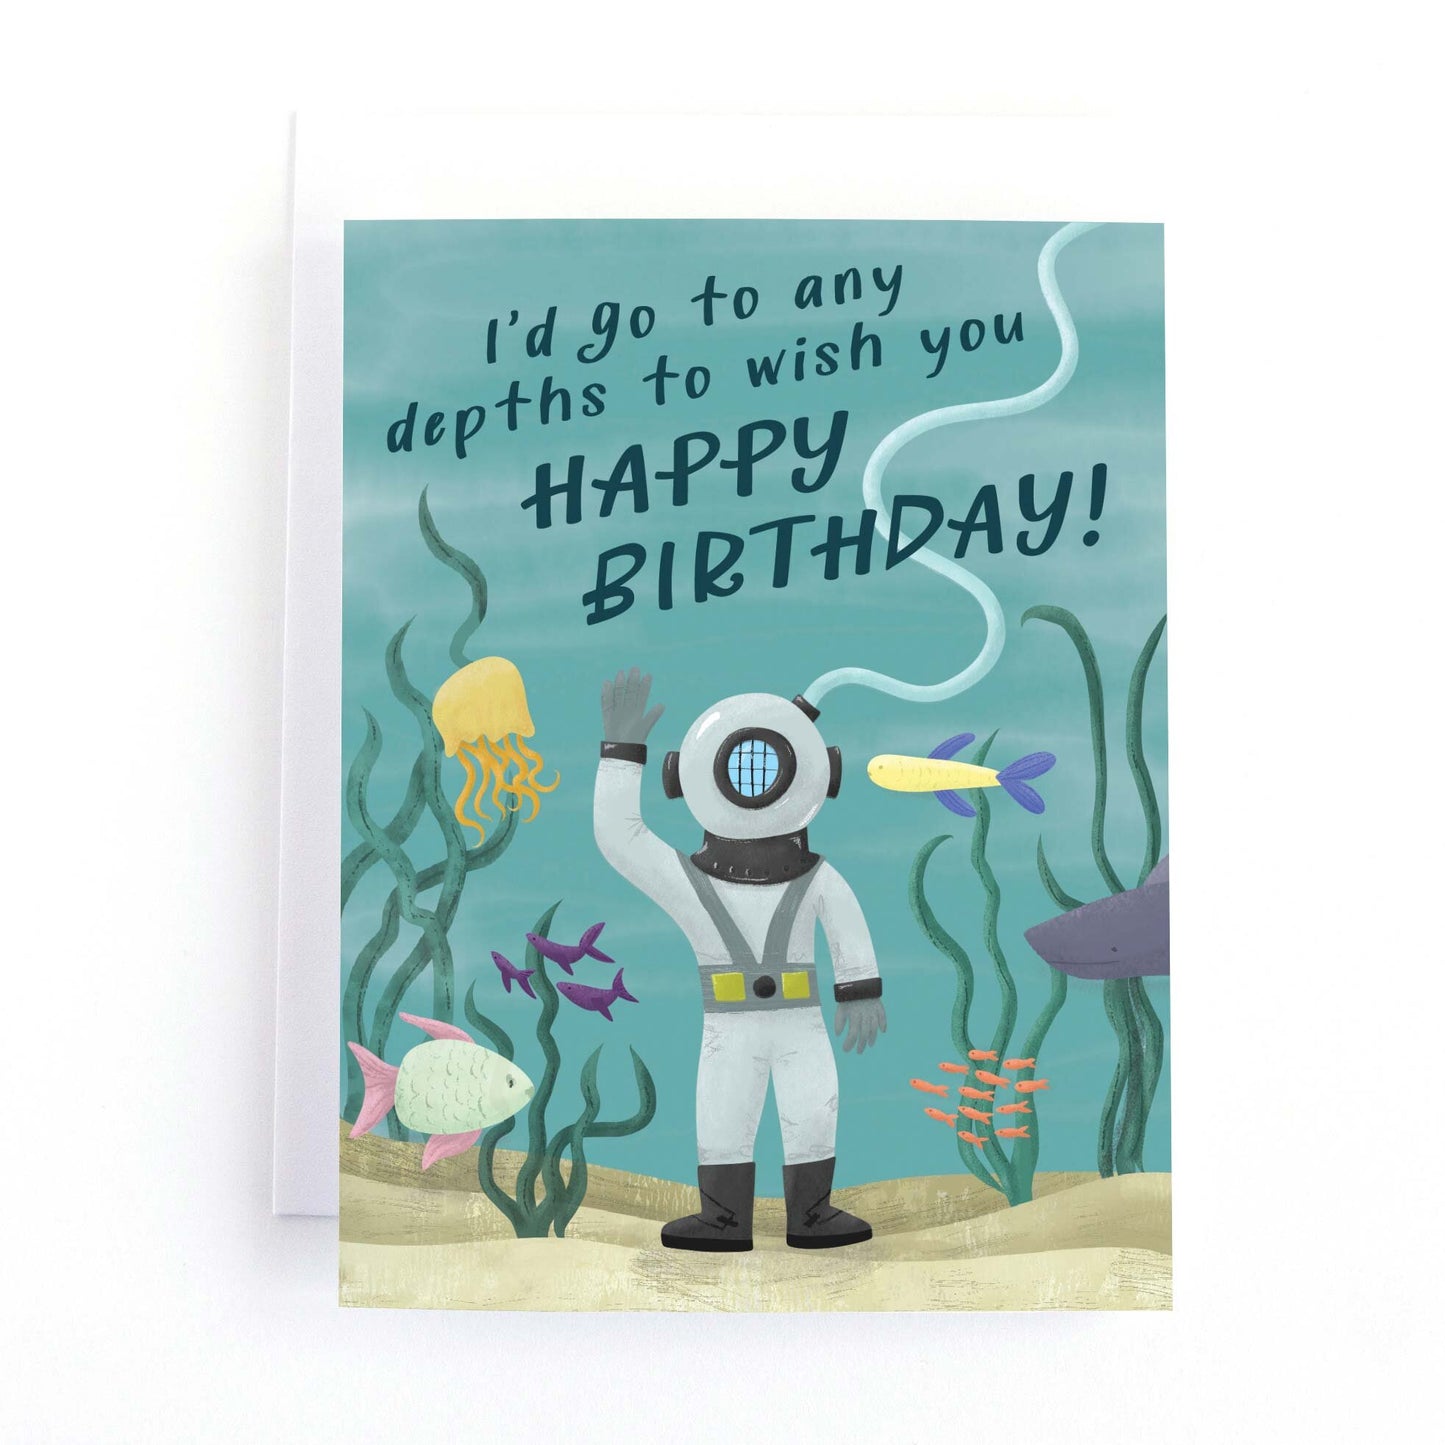 Kids birthday card featuring a deep sea diver in an ocean scene and the text, I'd go to any sepths to wish you Happy Birthday!